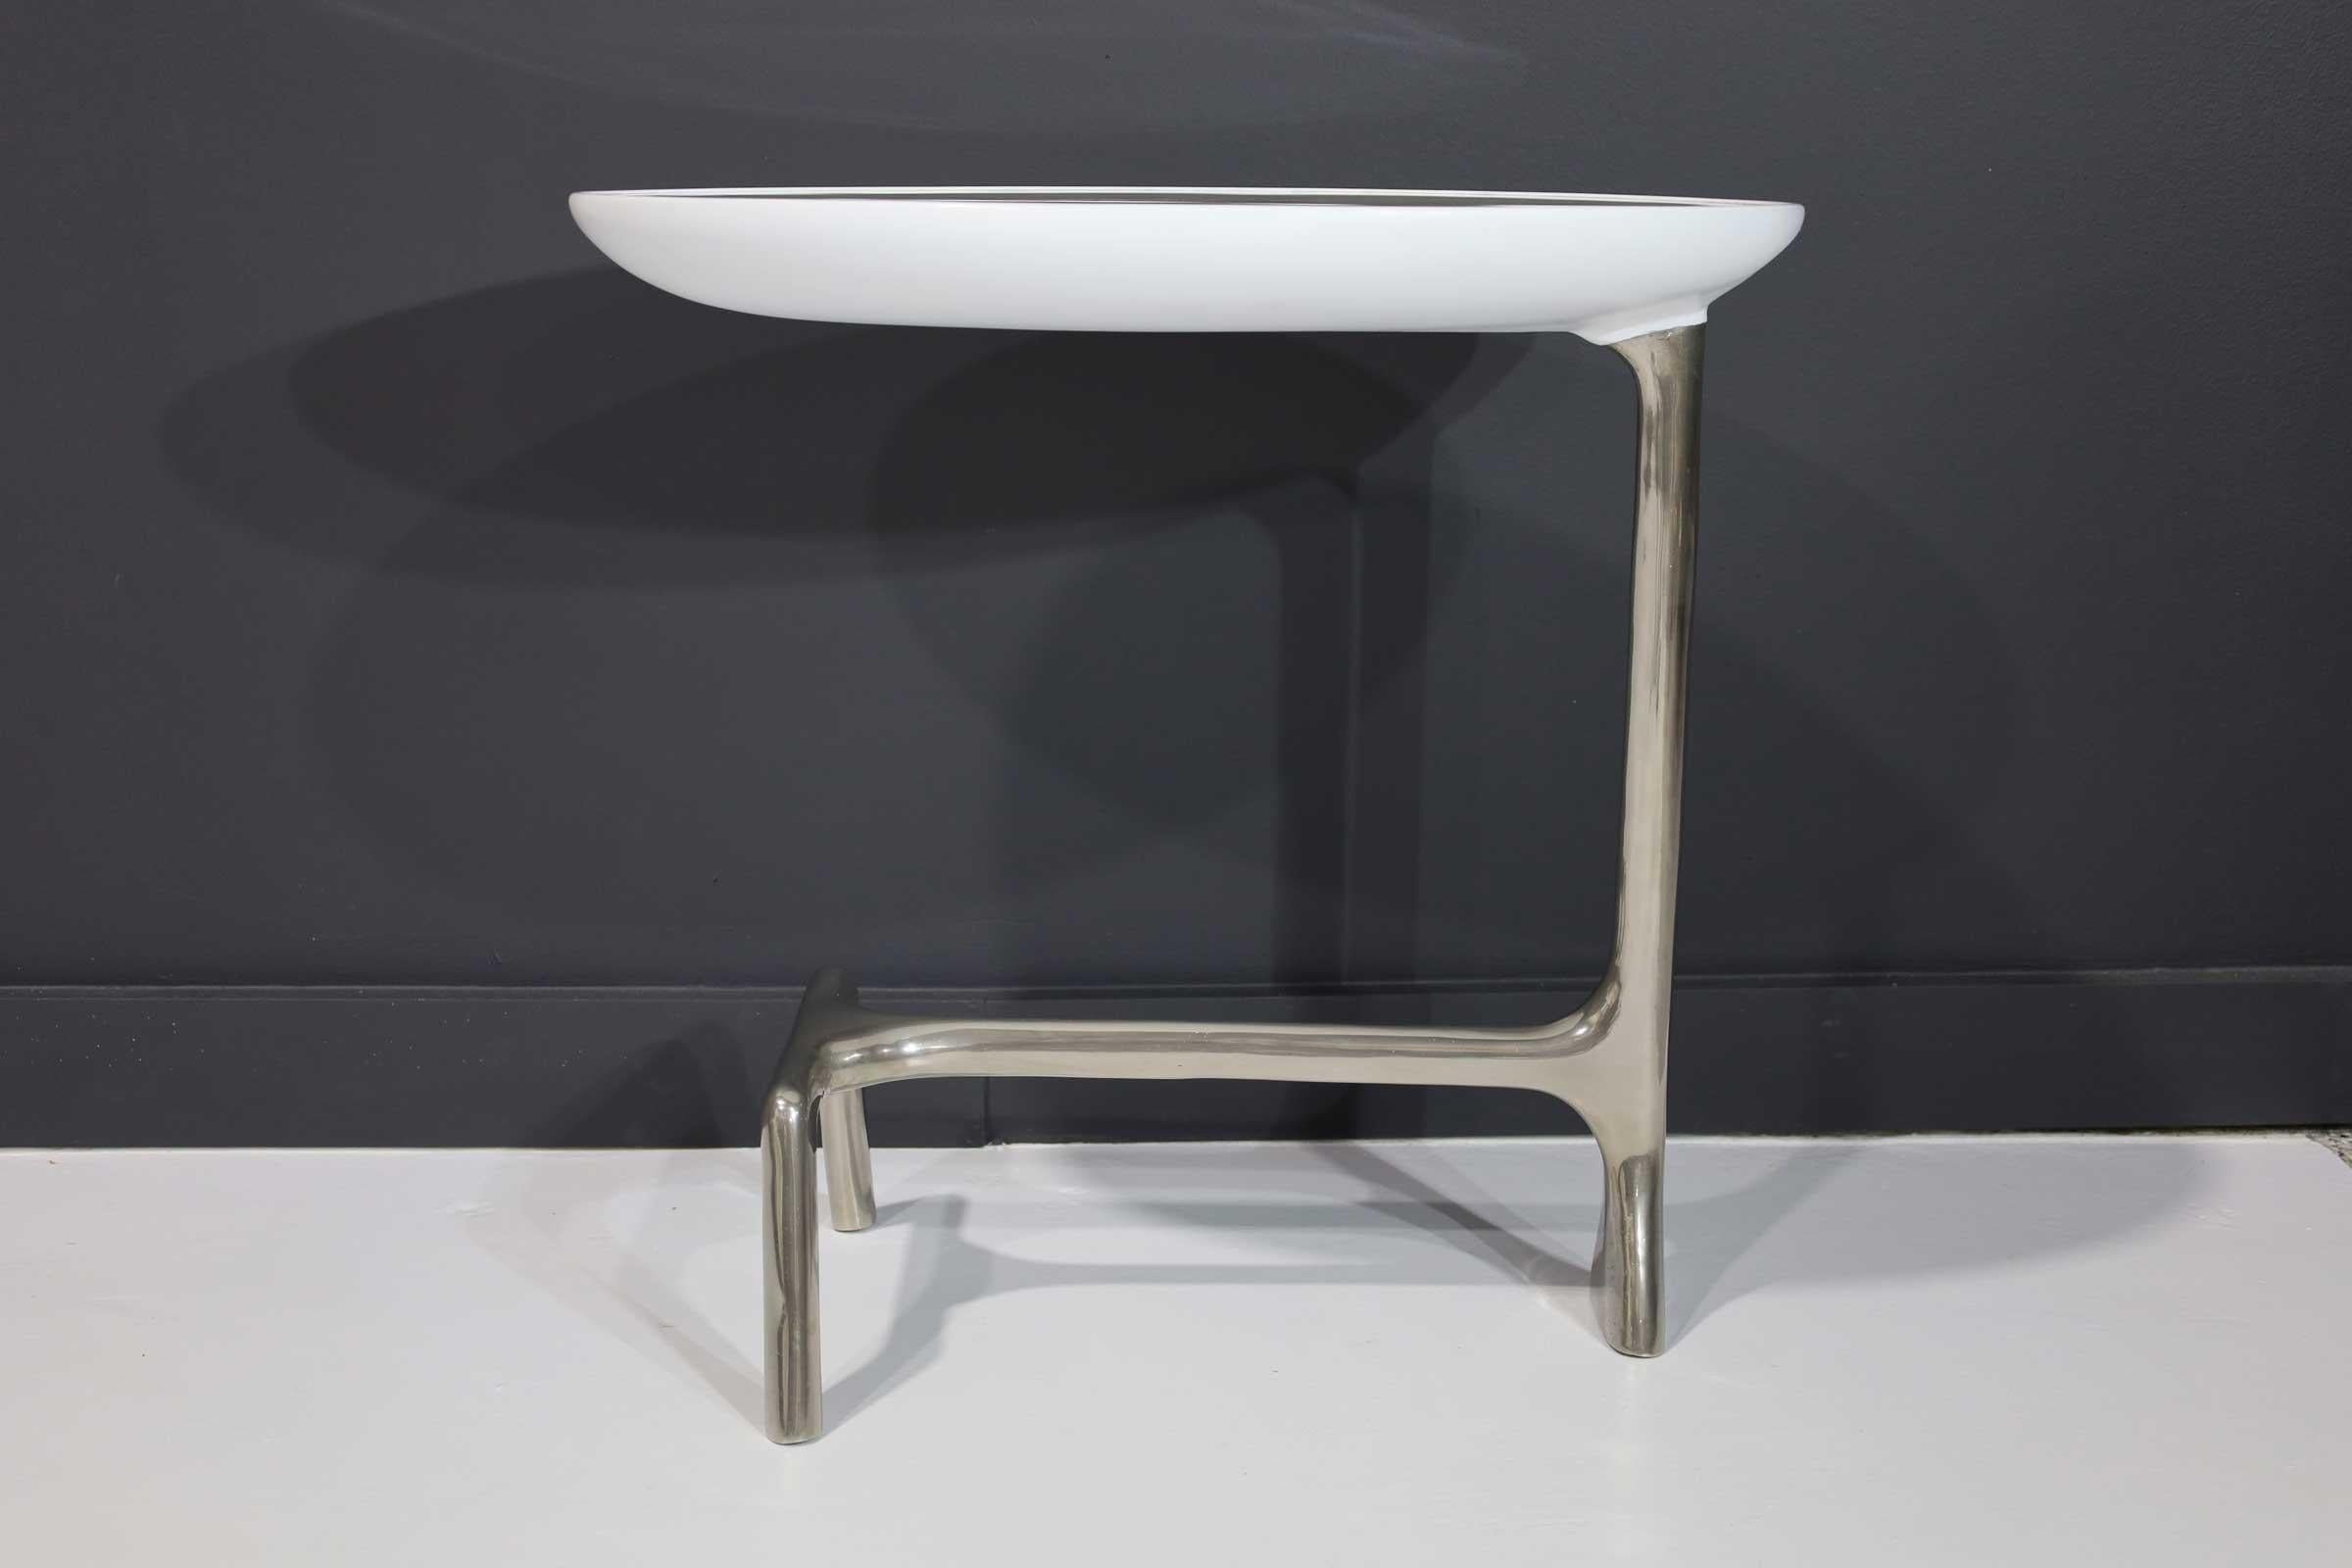 Gorgeous table by Scala Luxury. A polished nickel base and goatskin top. This piece is a solid base side table that has been brush polished. The goatskin top is made from one rare large shagreen skin. The top has a white high gloss lacquer finish